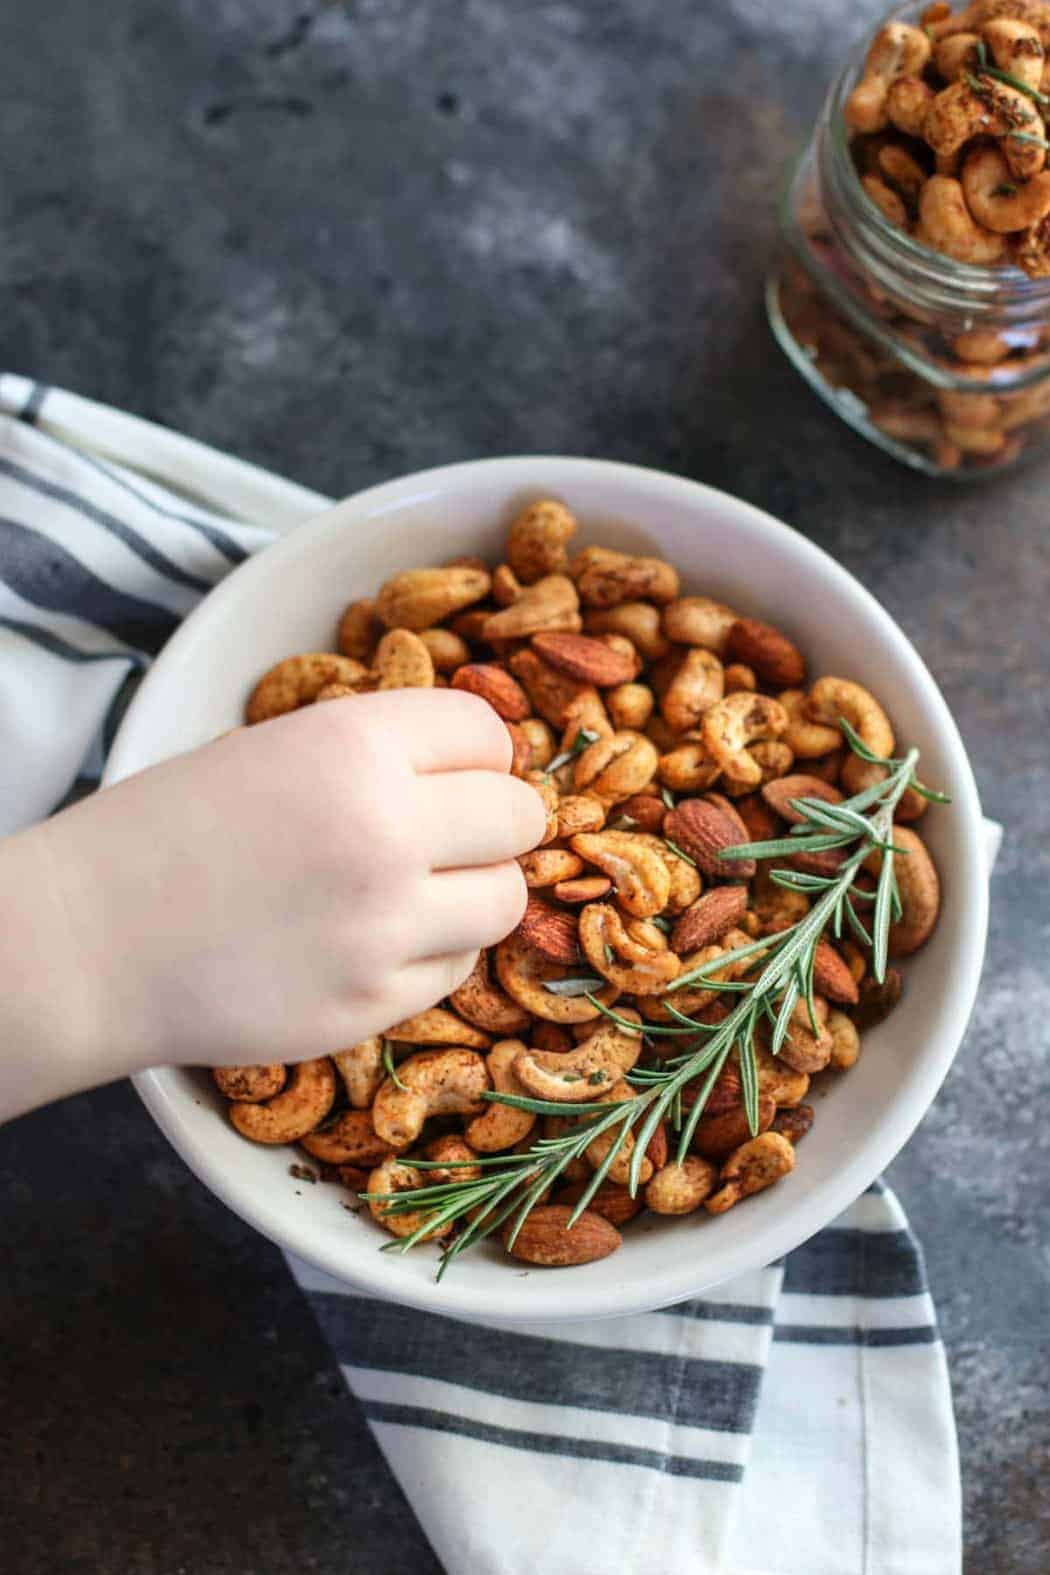 Chili and Rosemary Roasted Nuts 